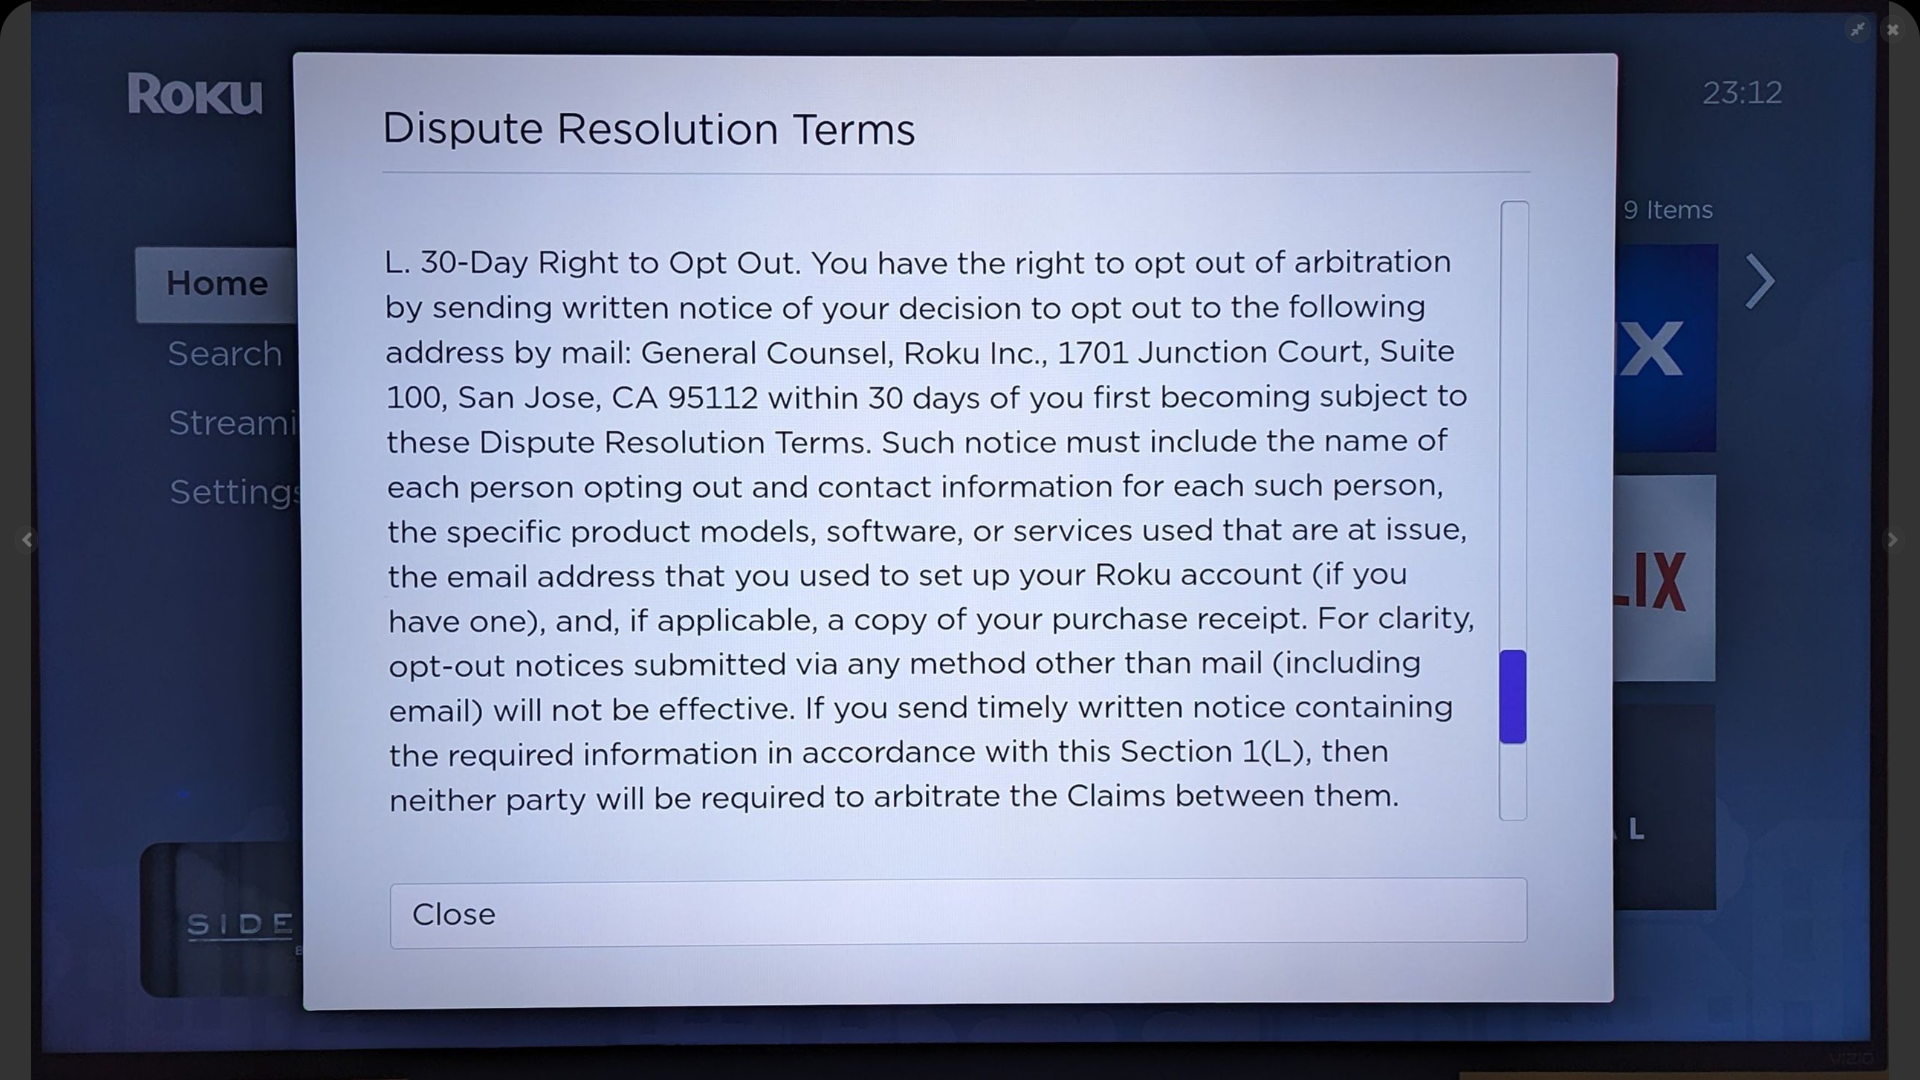 The opt-out process for Roku's updated Dispute Resolution terms